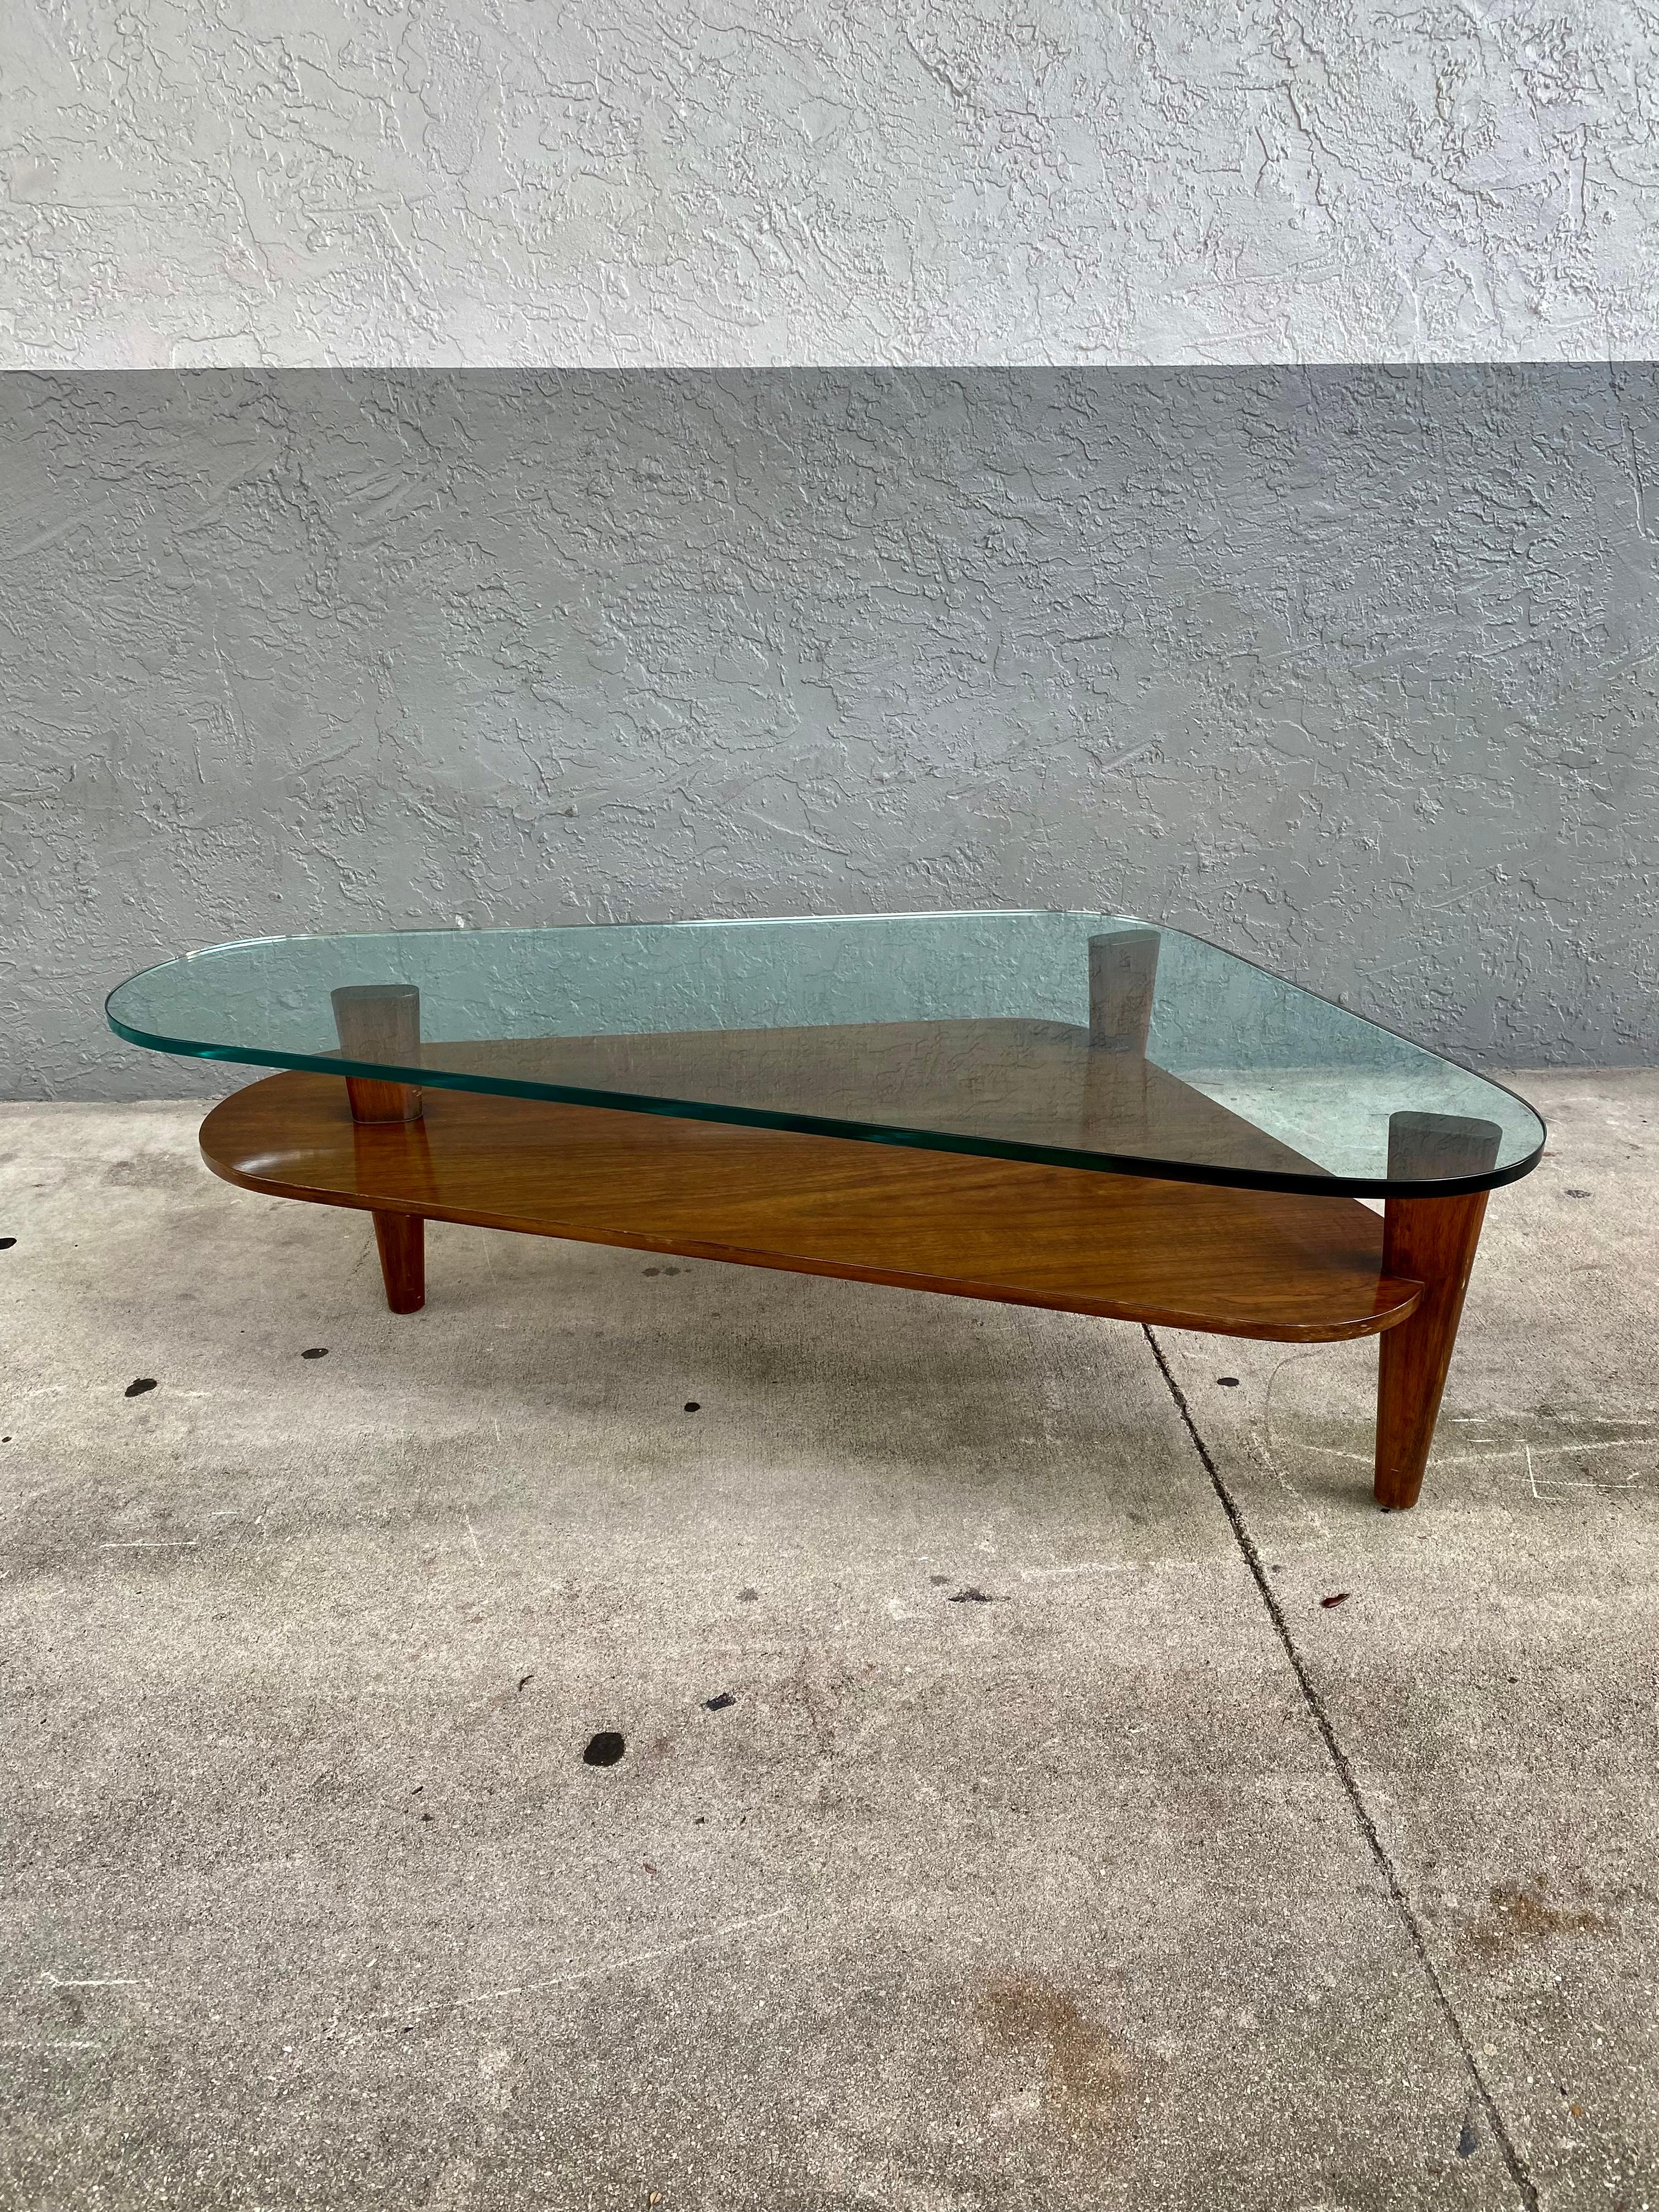 On offer on this occasion is one of the most stunning, table you could hope to find. This is an ultra-rare opportunity to acquire what is, unequivocally, the best of the best, it being a most spectacular and beautifully-presented coffee table.